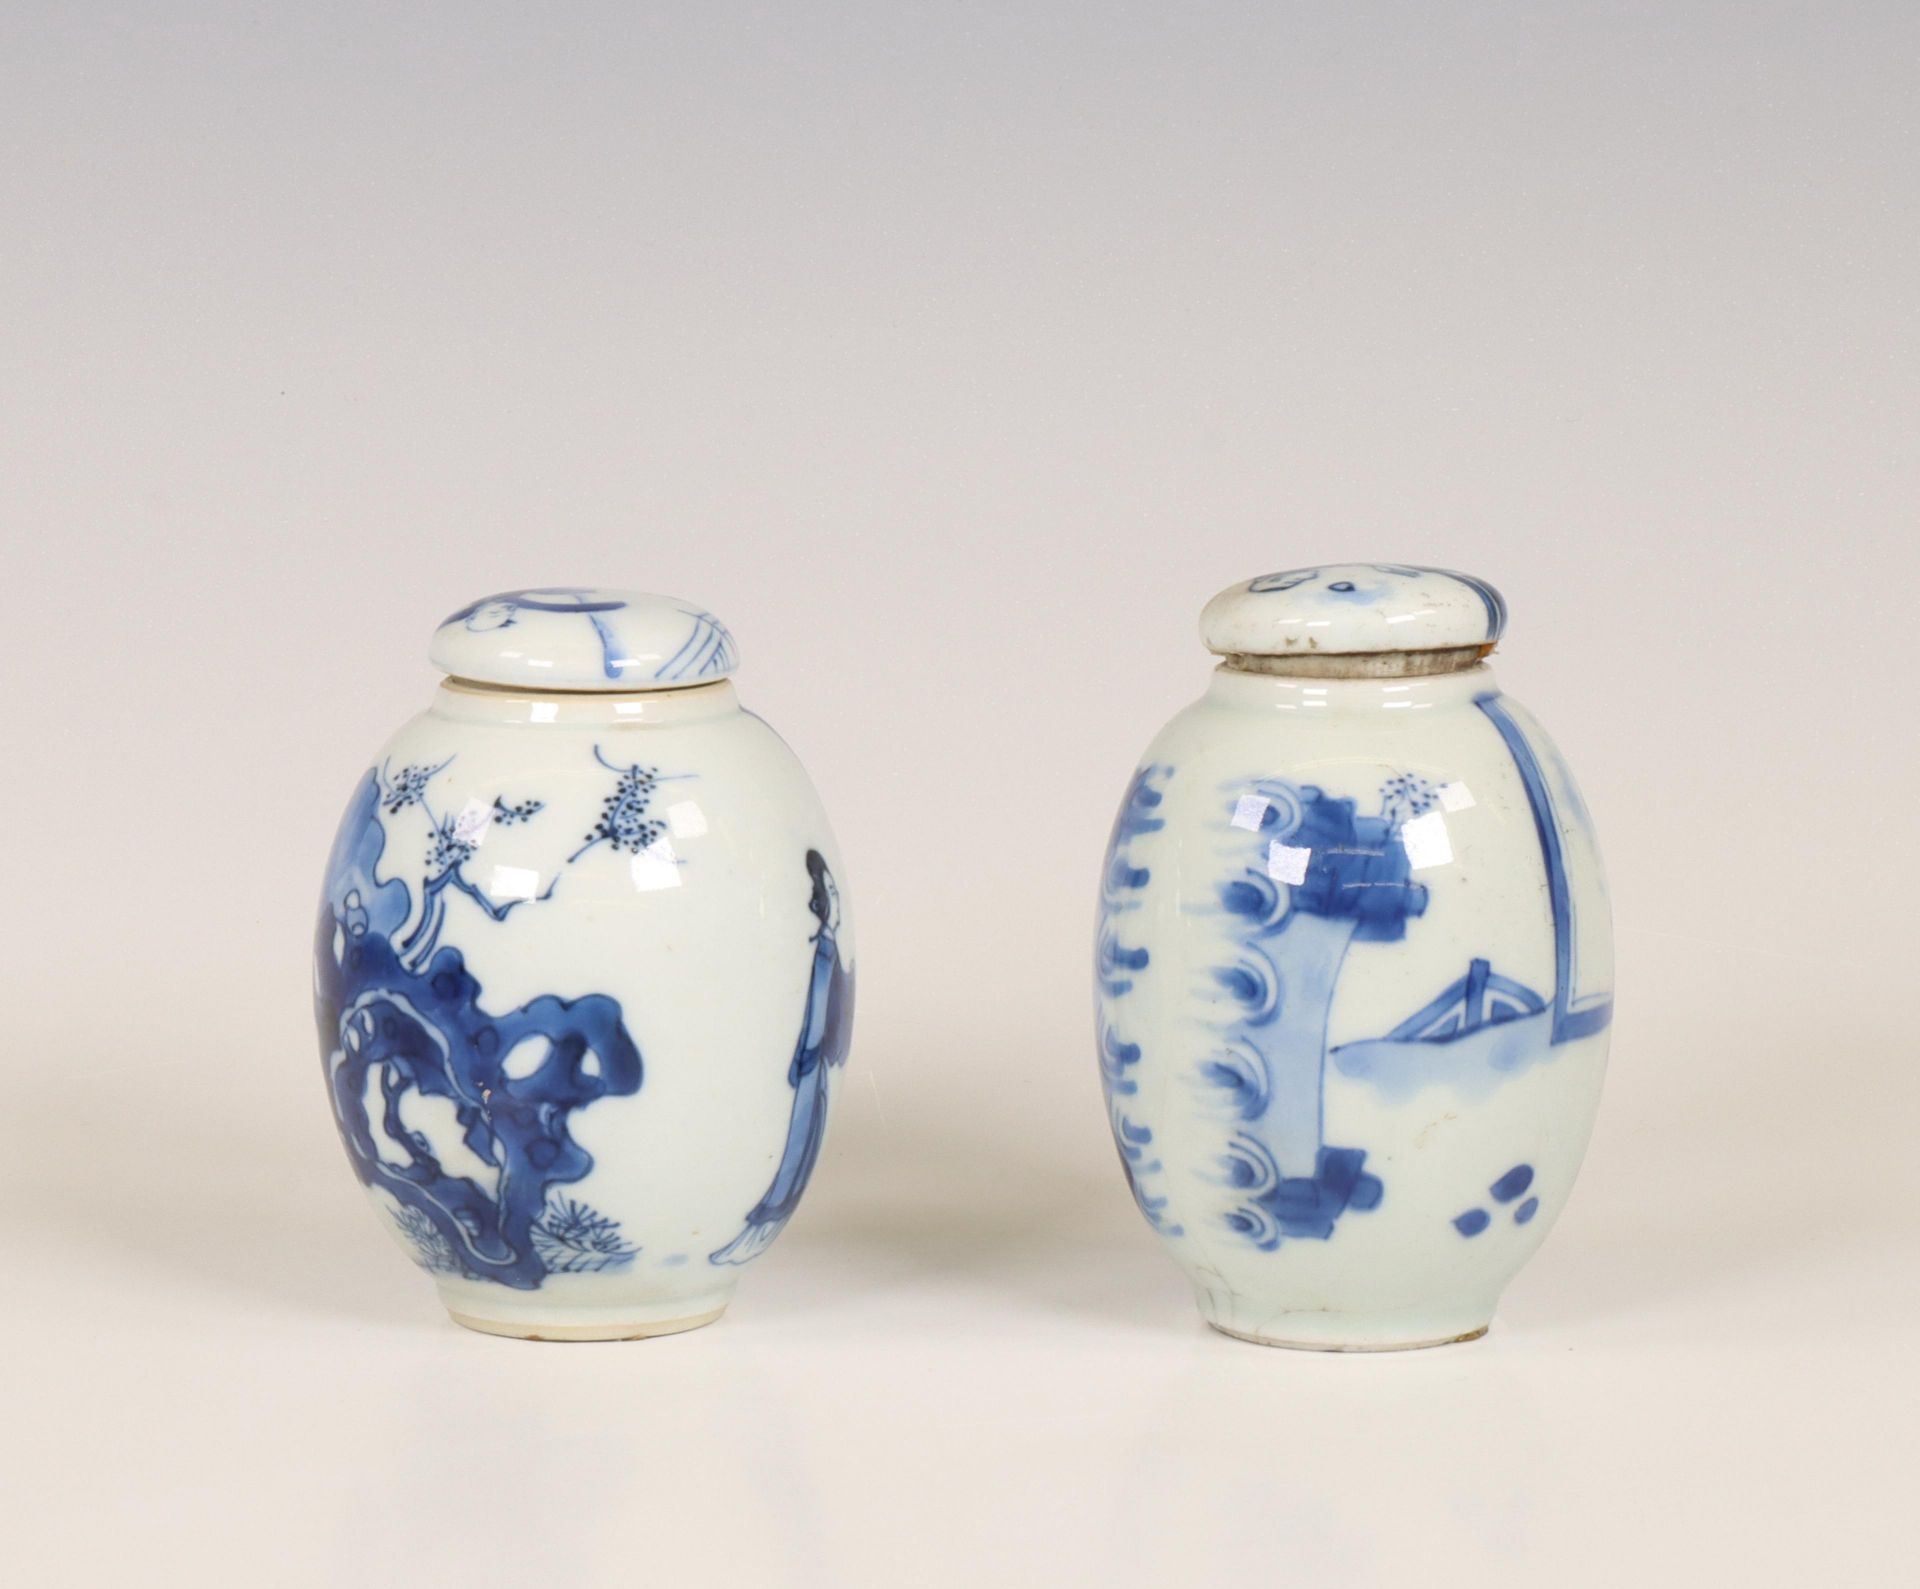 China, two blue and white porcelain tea-caddies and covers, Kangxi period (1662-1722), - Image 2 of 5